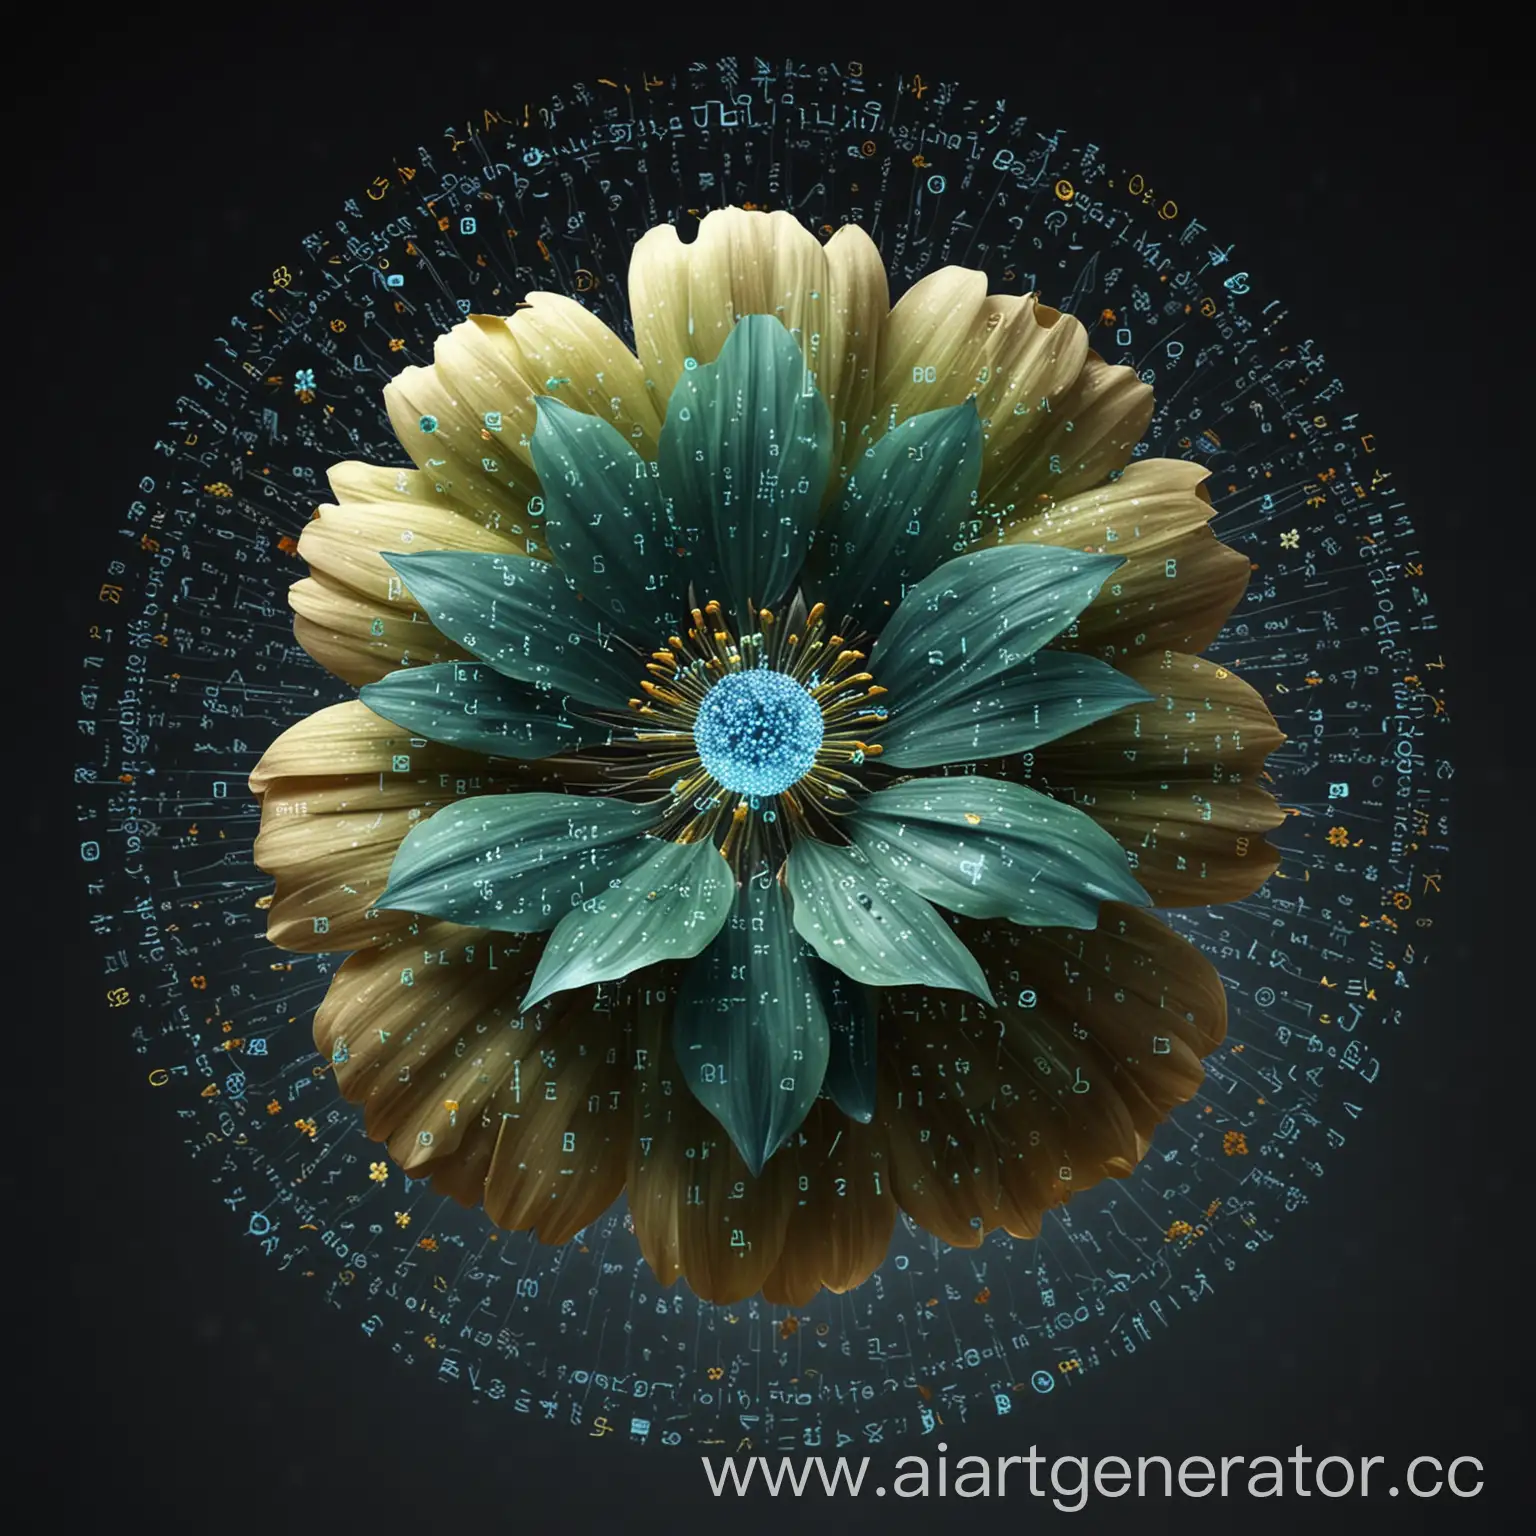 Digital-Flower-Avatar-with-Binary-Code-and-Virtual-Particles